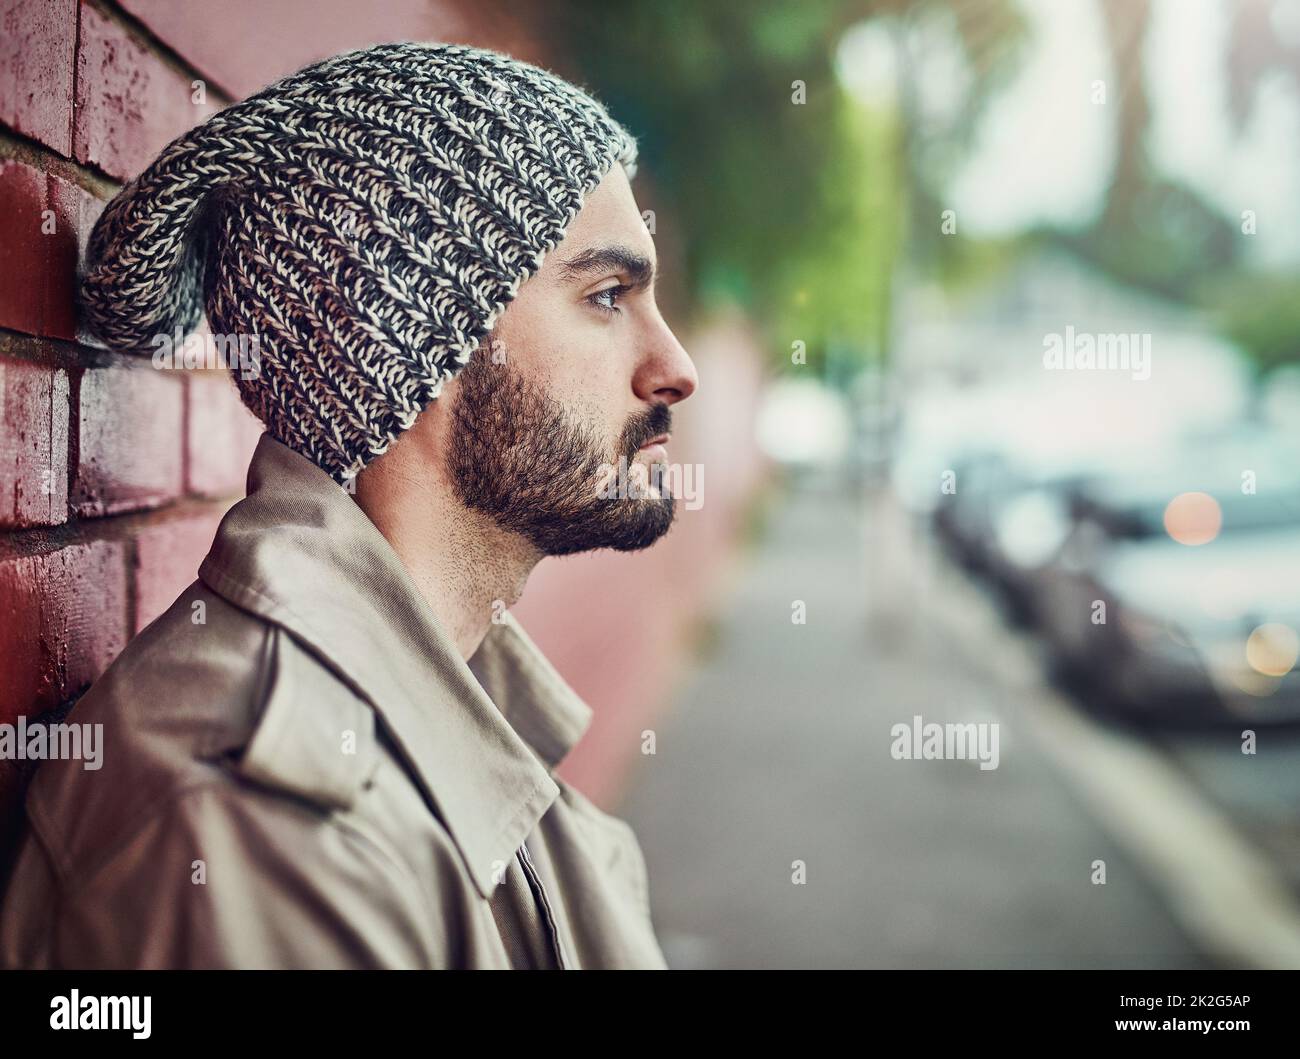 You cant beat that style of the street. Shot of a fashionable young man wearing urban wear in the city. Stock Photo